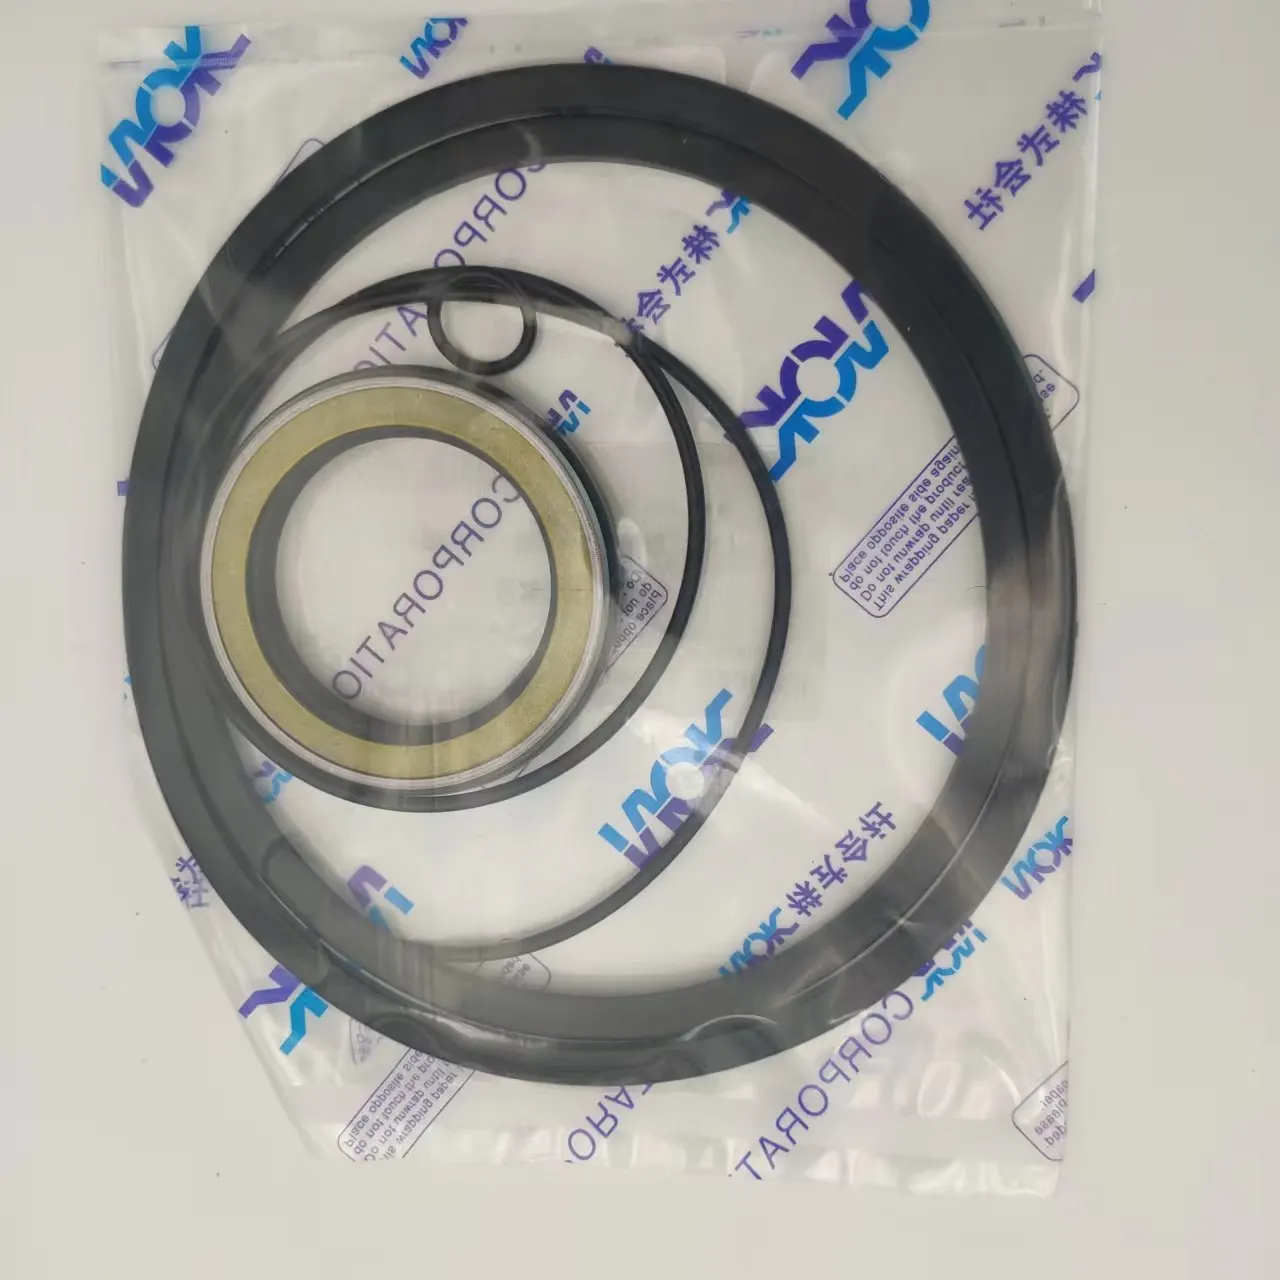 

XPS SEAL KIT Hydraulic Pump Seal kit FOR CAT E312 SWING MOTOR FINAL MOTOR CENTER JOINT ARM BOOM BUCKET CONTROL VALVE